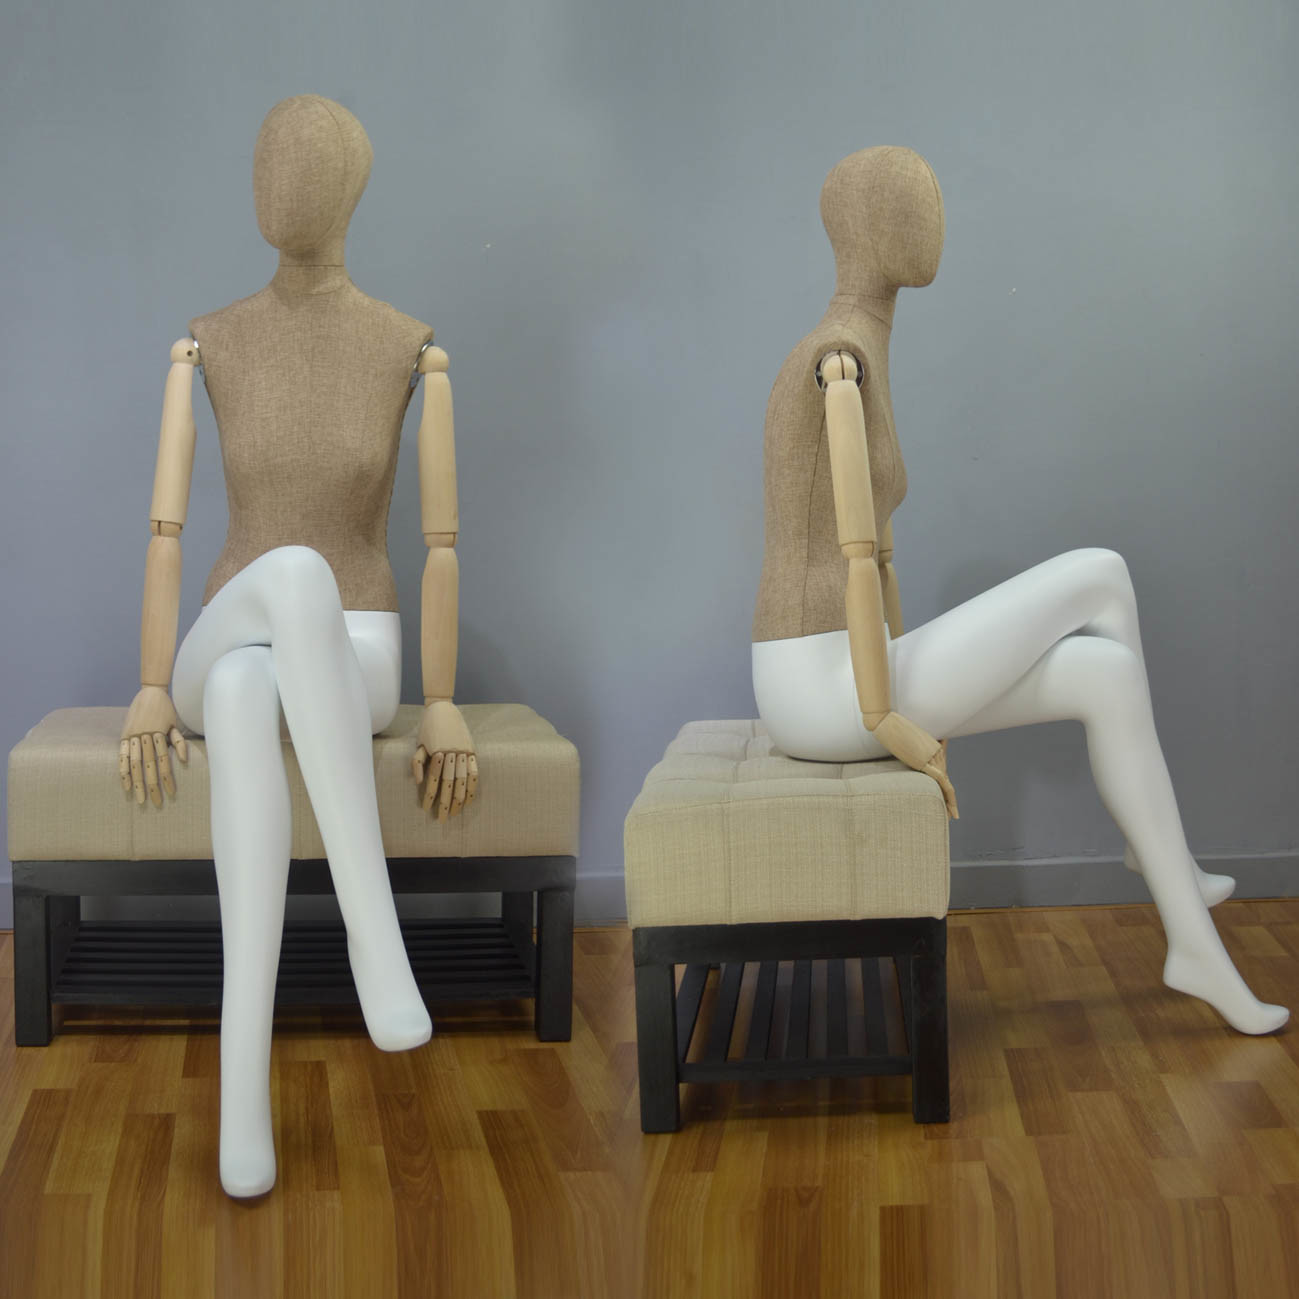 Fabric Wrapped Sitting Female Mannequin with Wood Arm